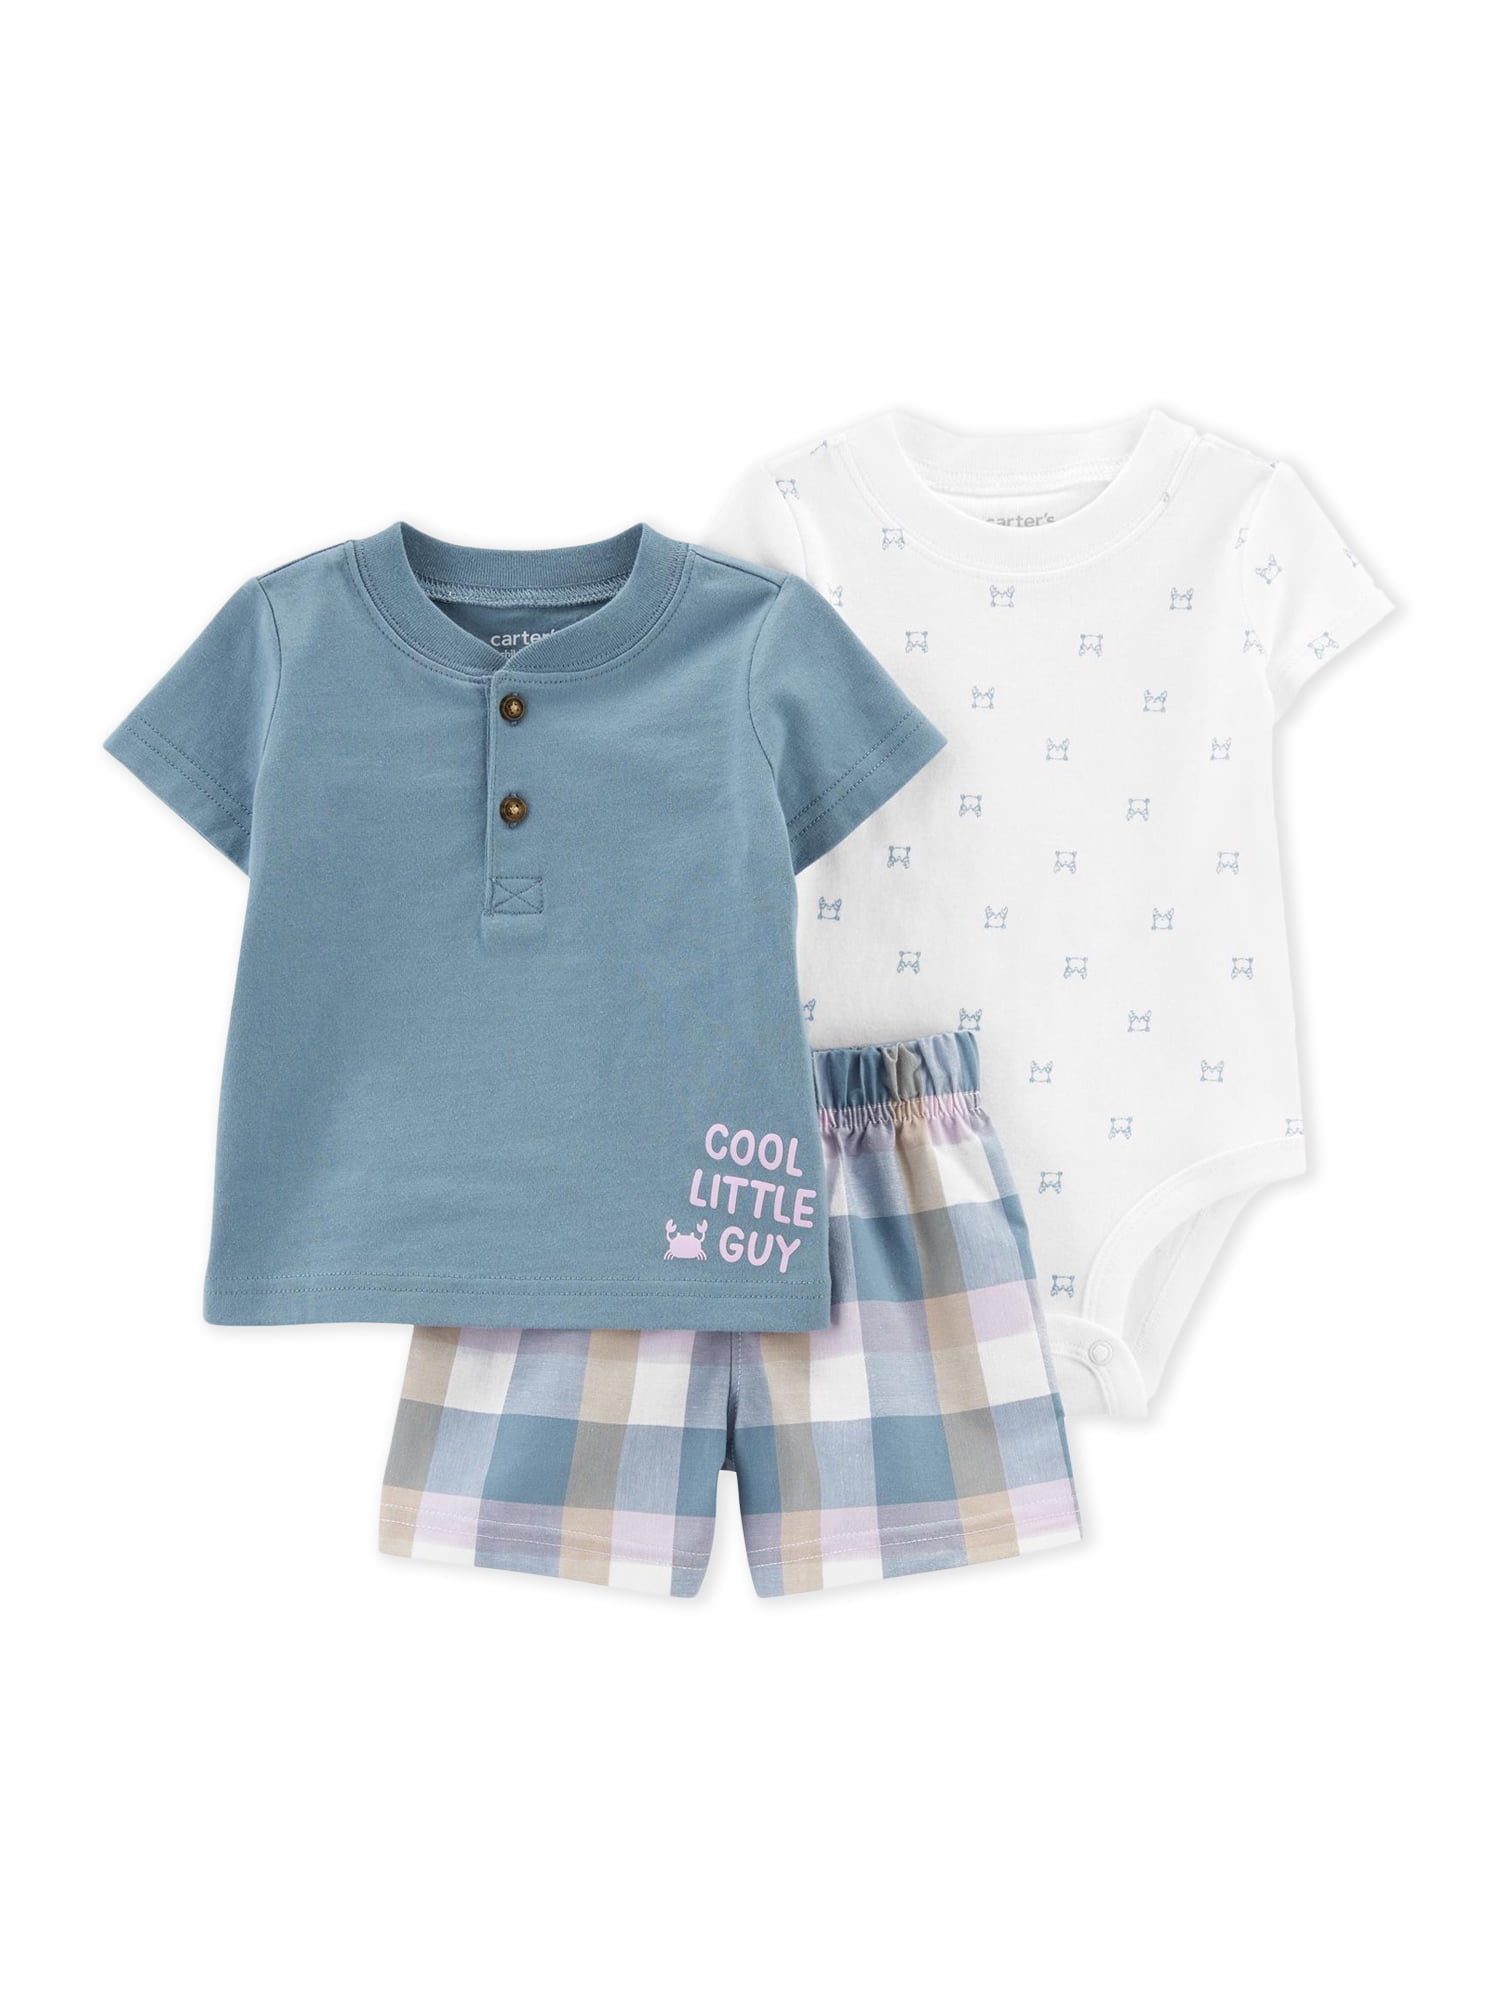 Carter's Child of Mine Baby Boy Shorts Outfit Set, Sizes 0-24M